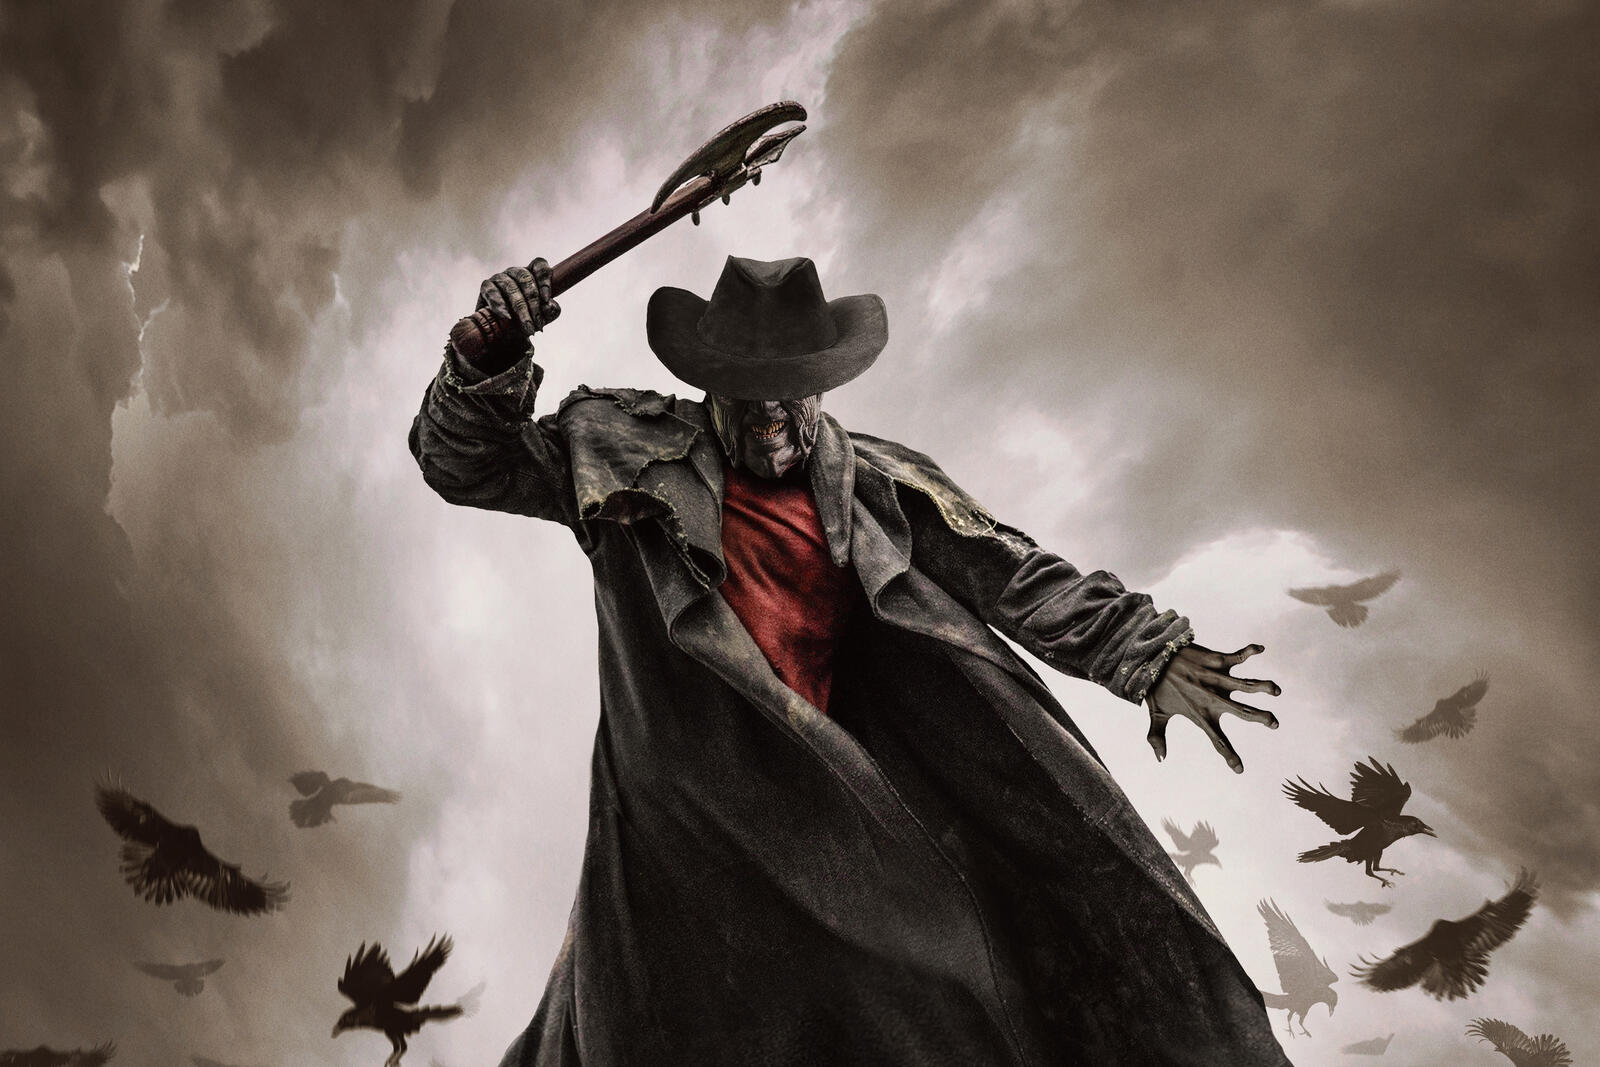 Free photo Screensaver from Jeepers Creepers 3.